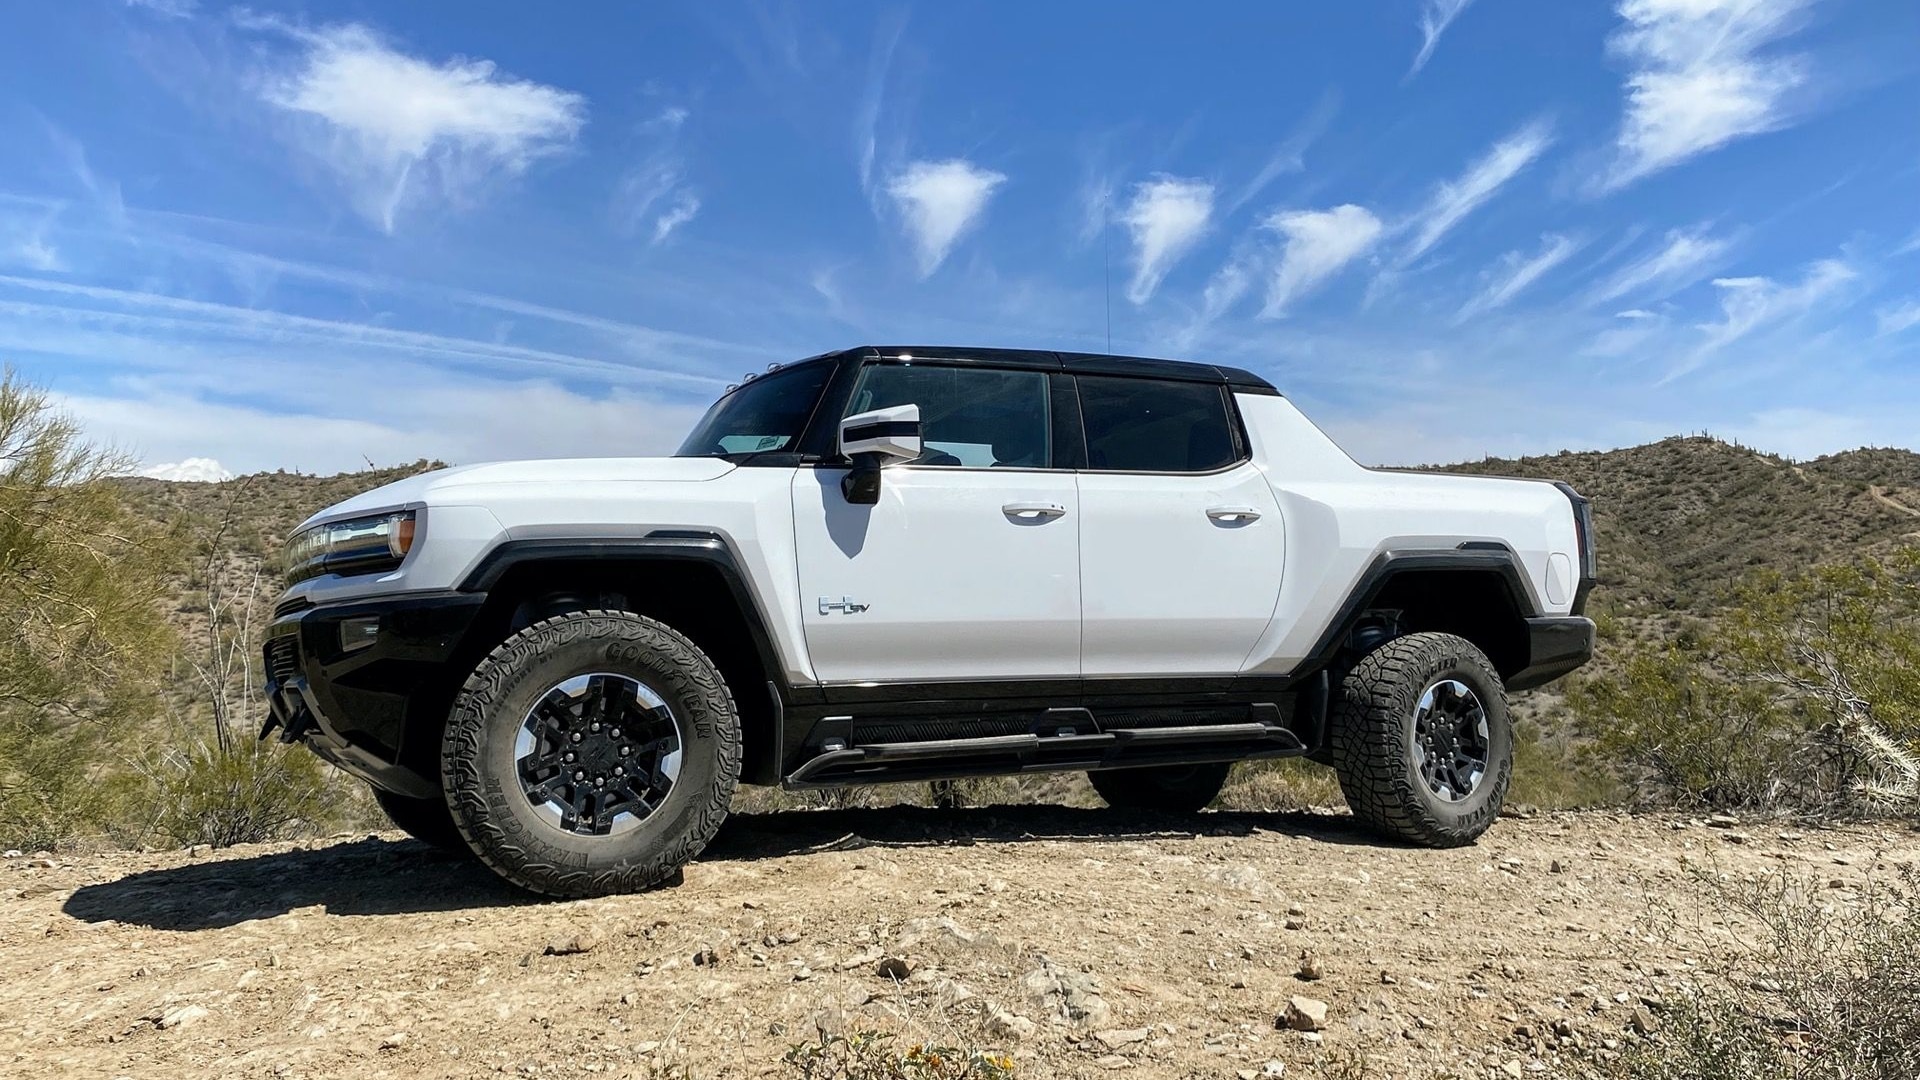 First drive review: 2022 GMC Hummer EV shows how electric off-roading can be